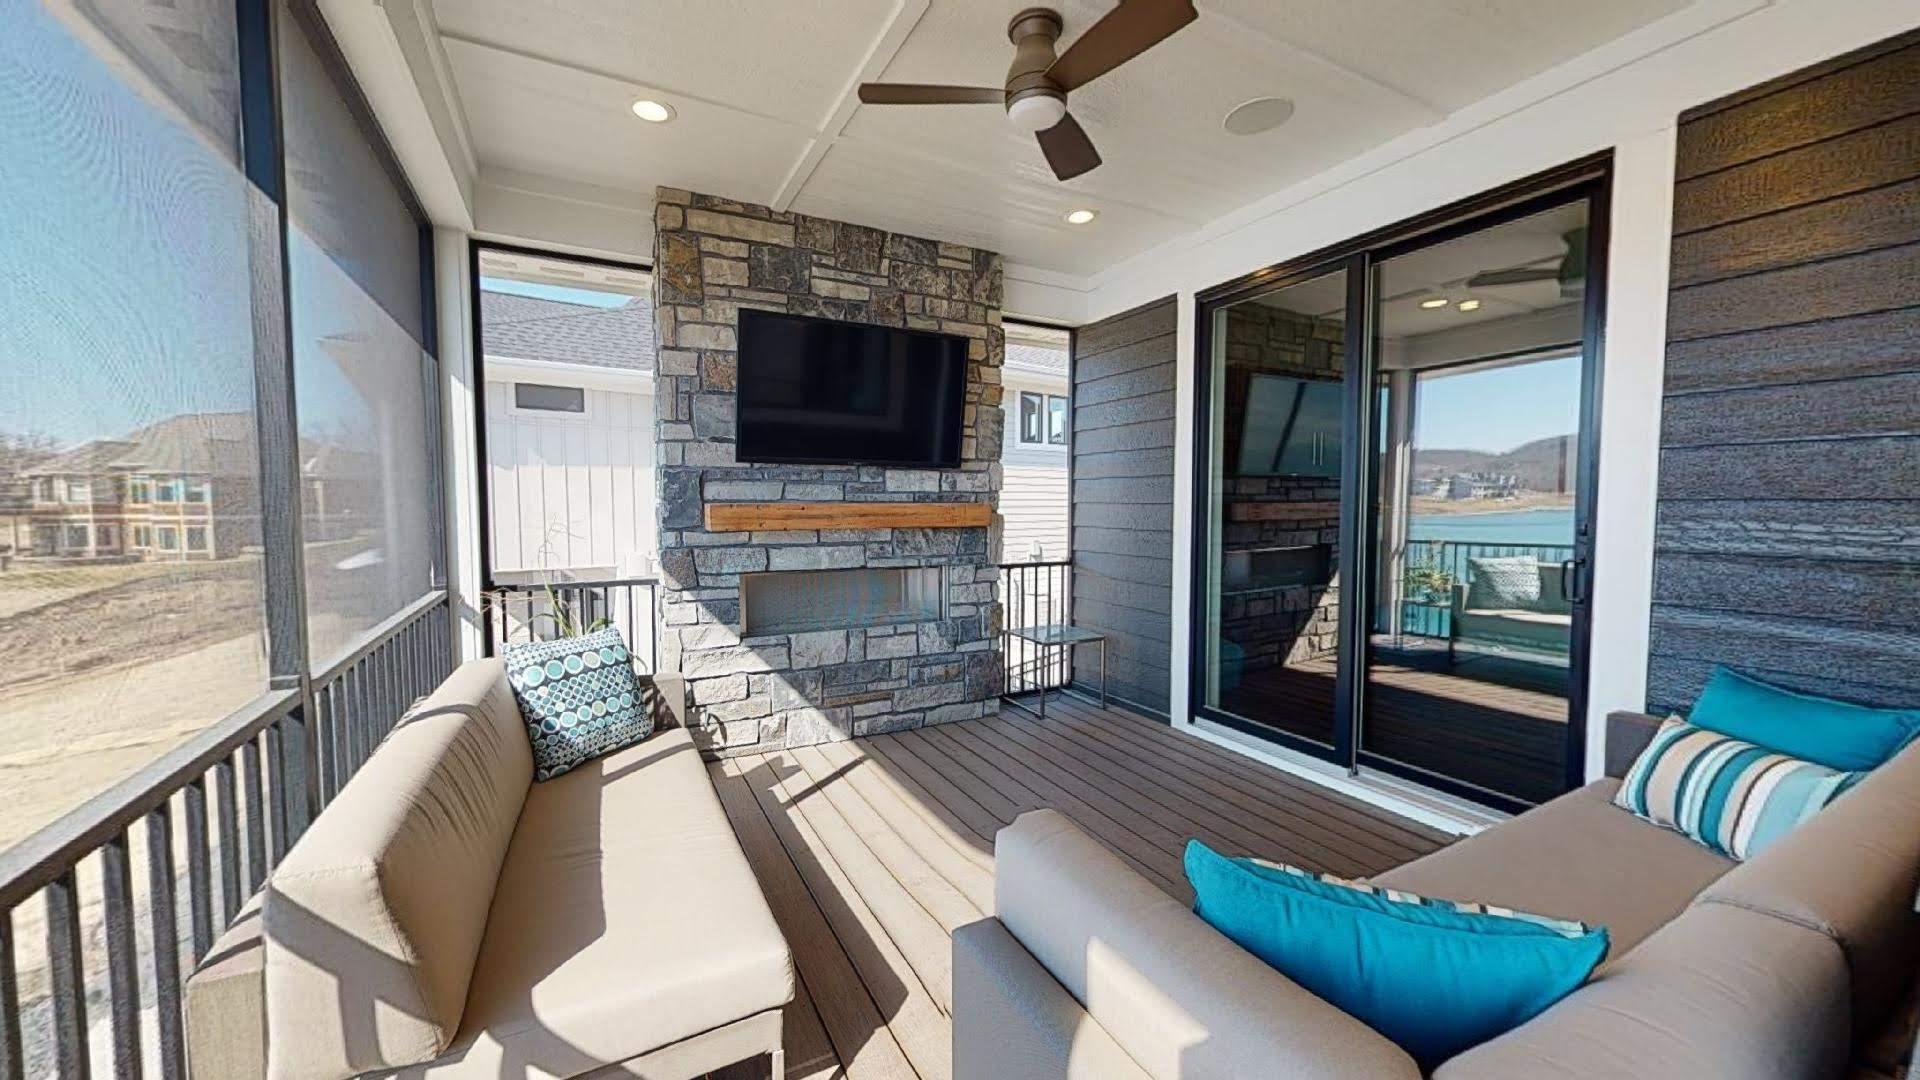 Relax On The Screened In Porch with TV & Fireplace